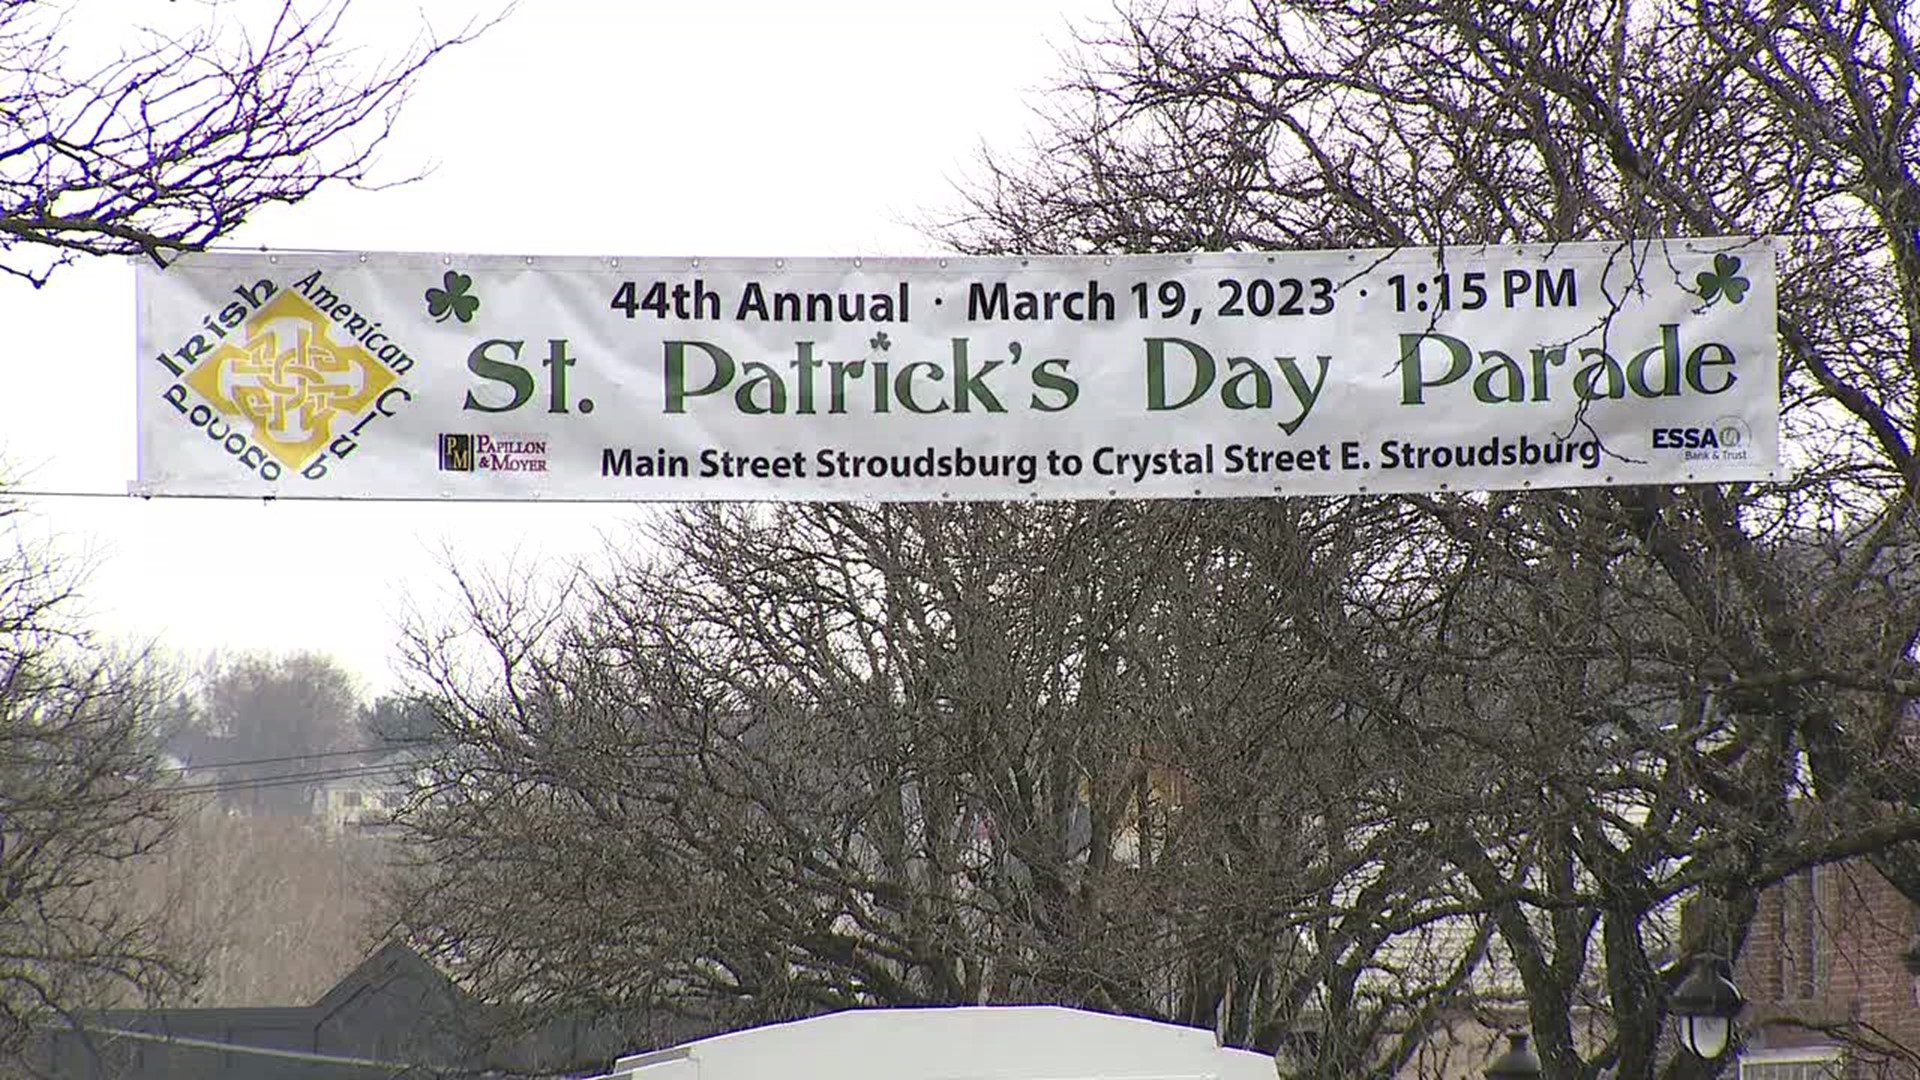 A long-standing tradition in one part of the Poconos that celebrates all things Irish kicks off this Sunday.